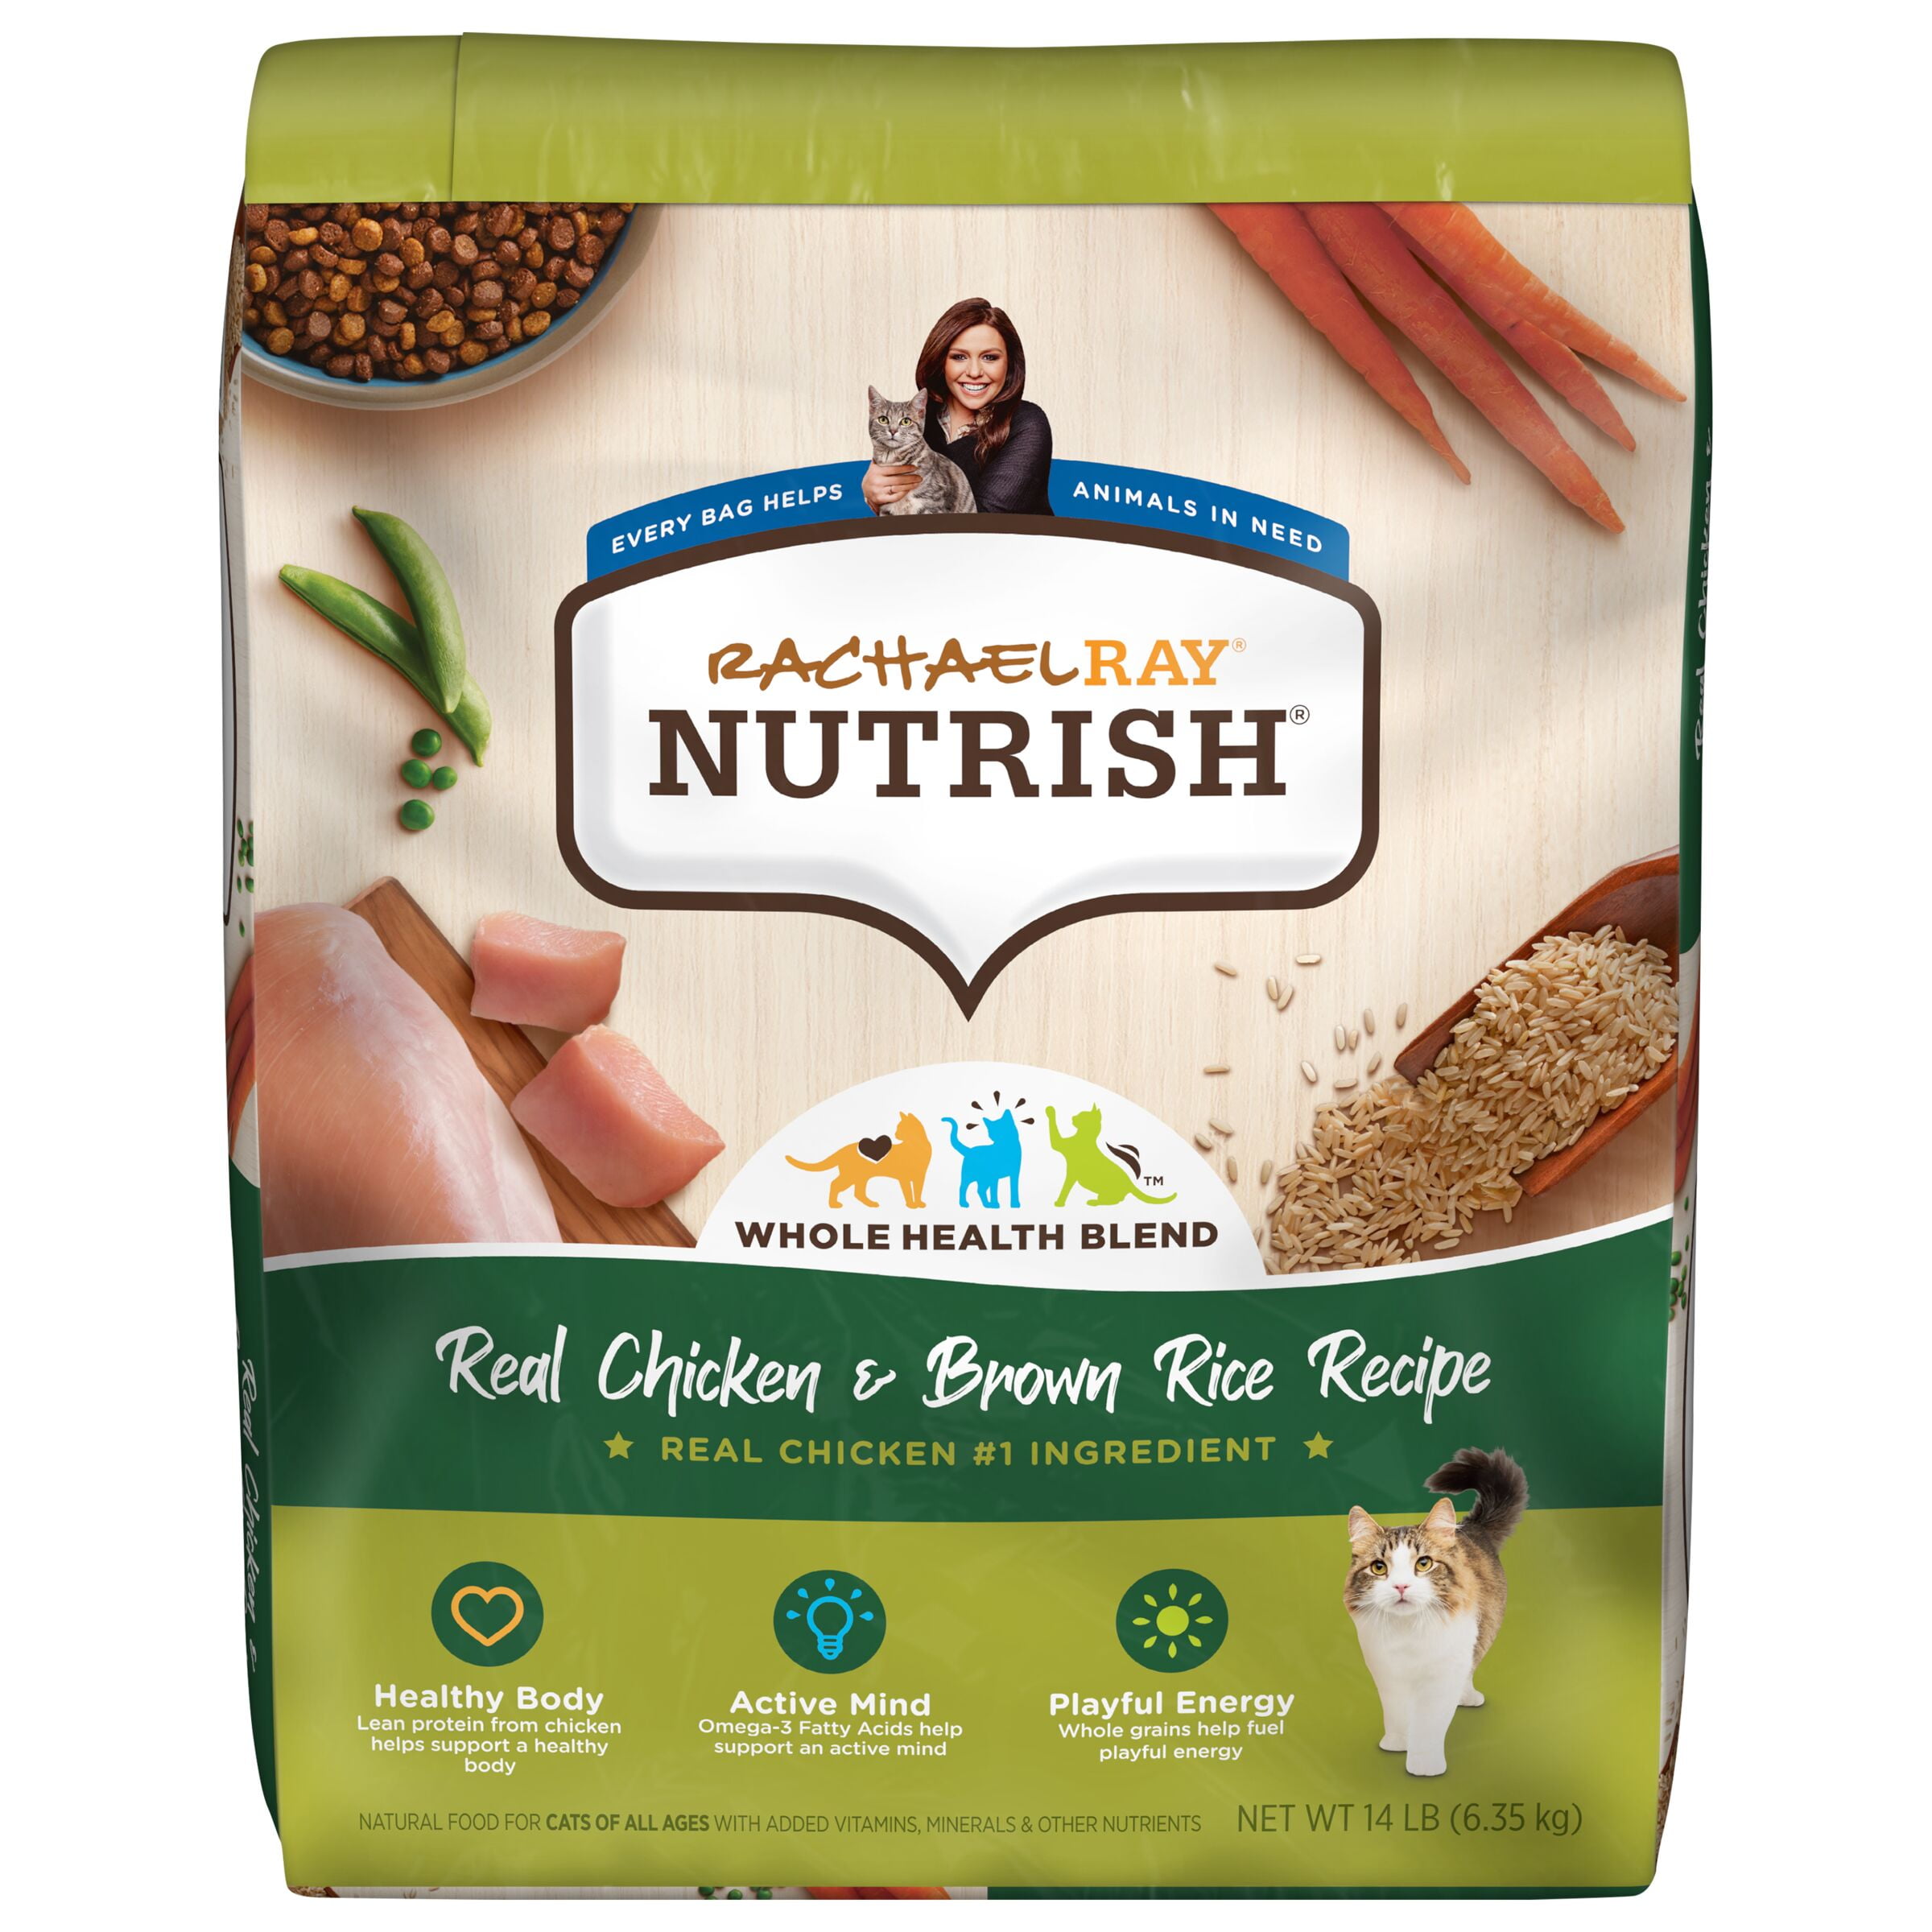 Rachael Ray Nutrish Real Chicken & Brown Rice Recipe for cats